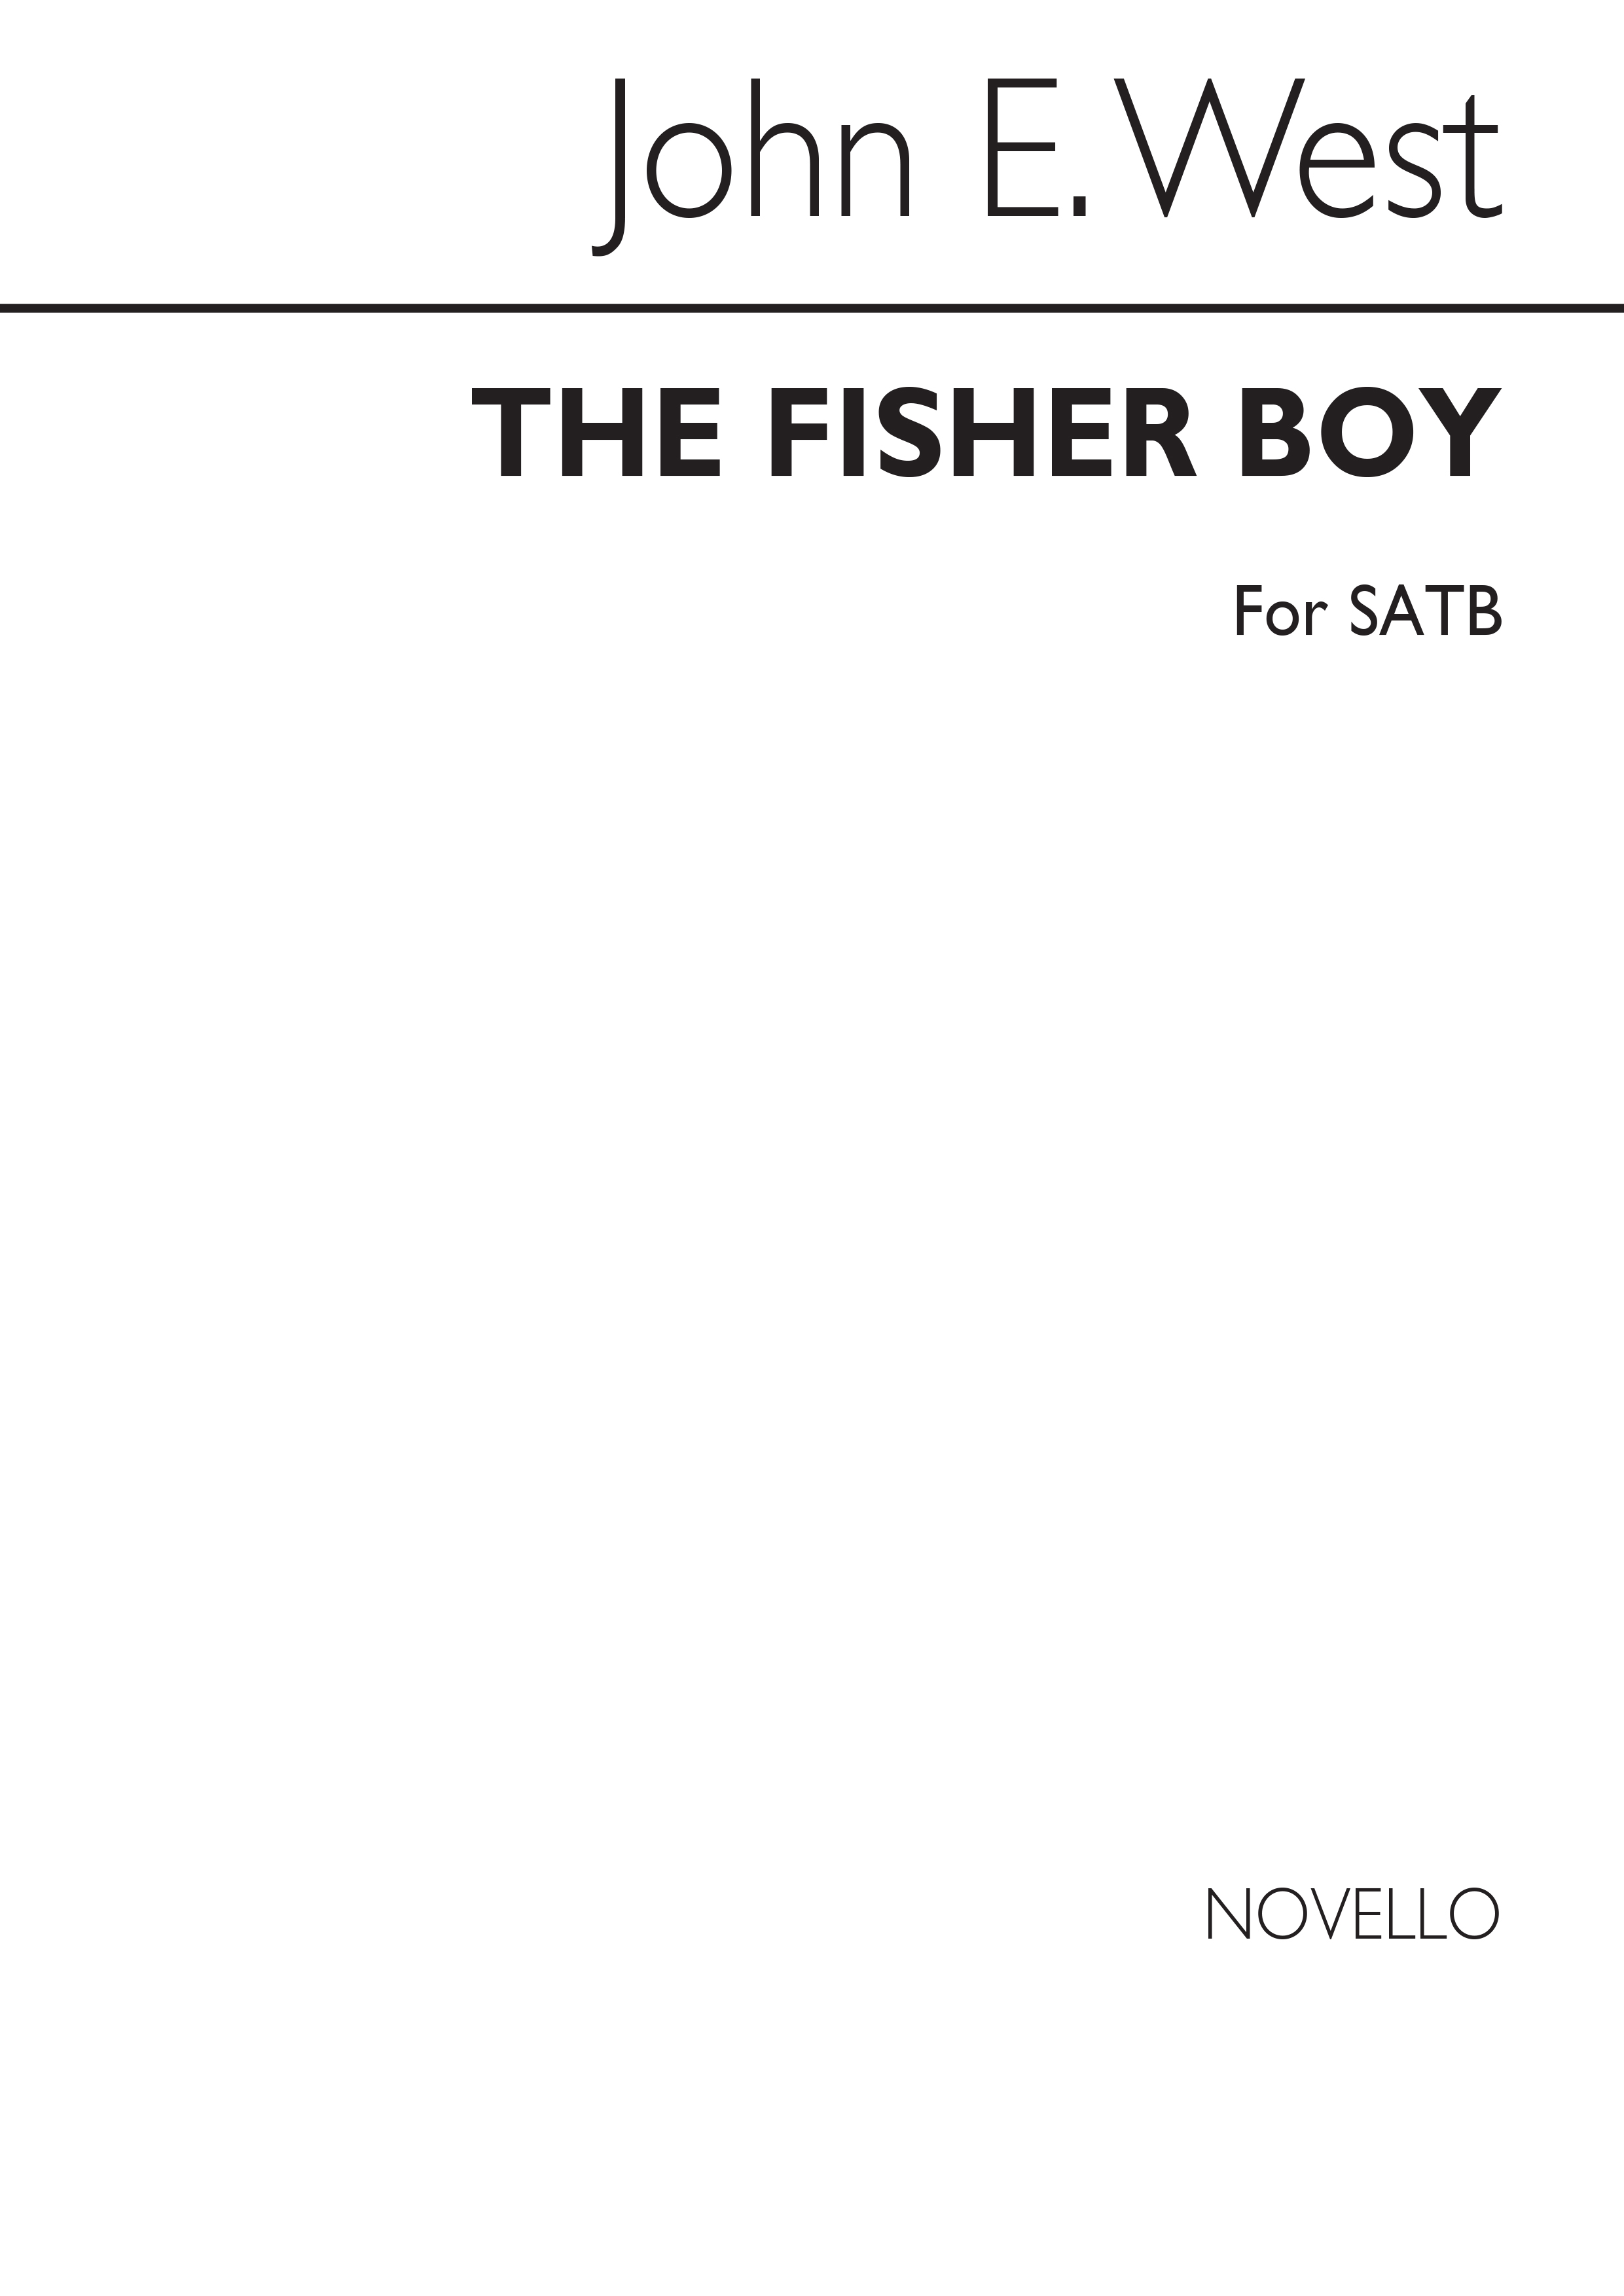 West: The Fisher Boy SATB